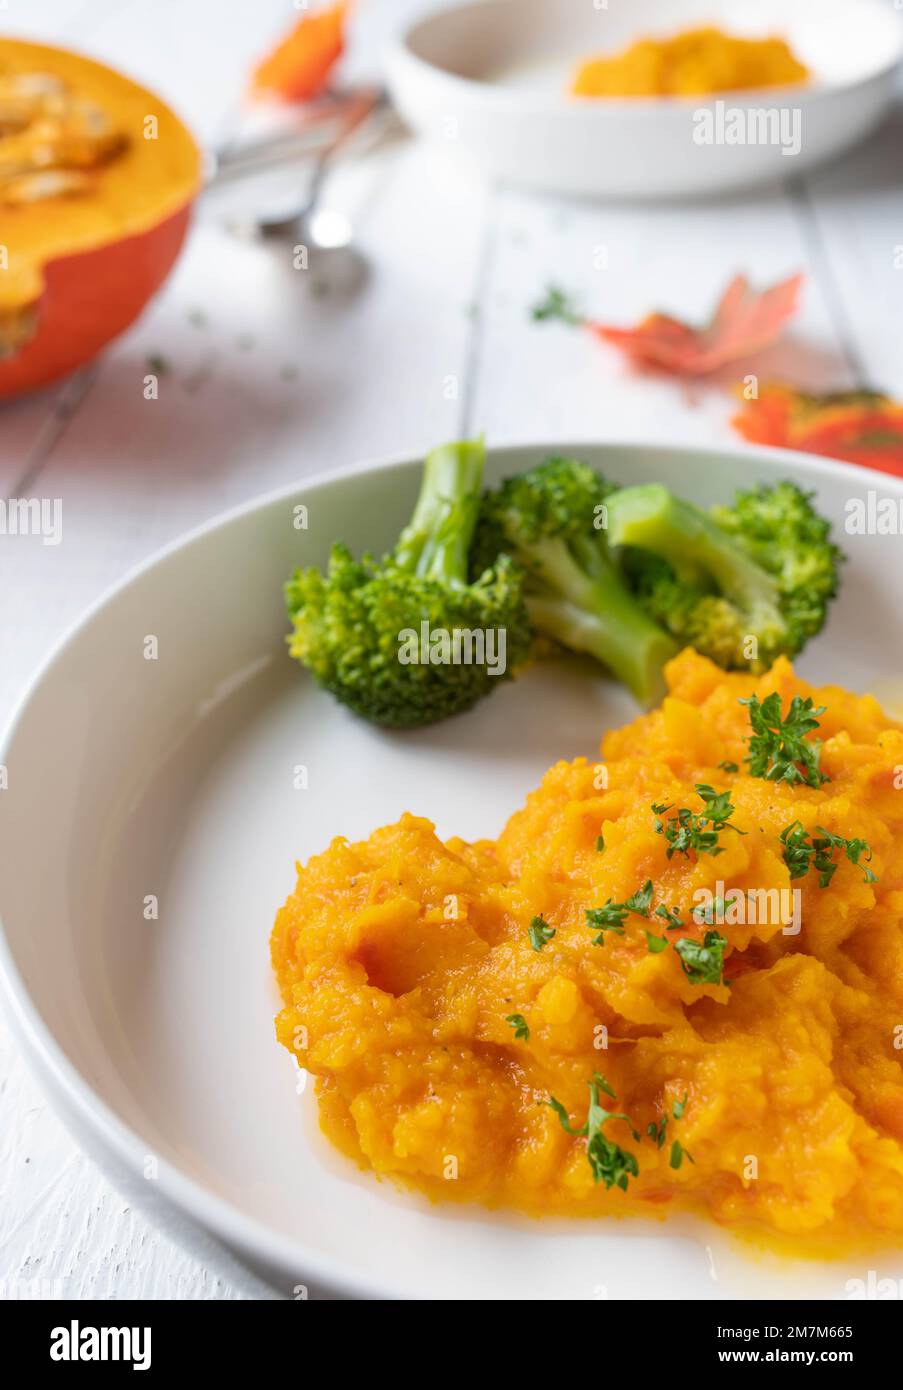 Fitness food side dishes for dinner or lunch with pumpkin puree and broccoli on a plate Stock Photo